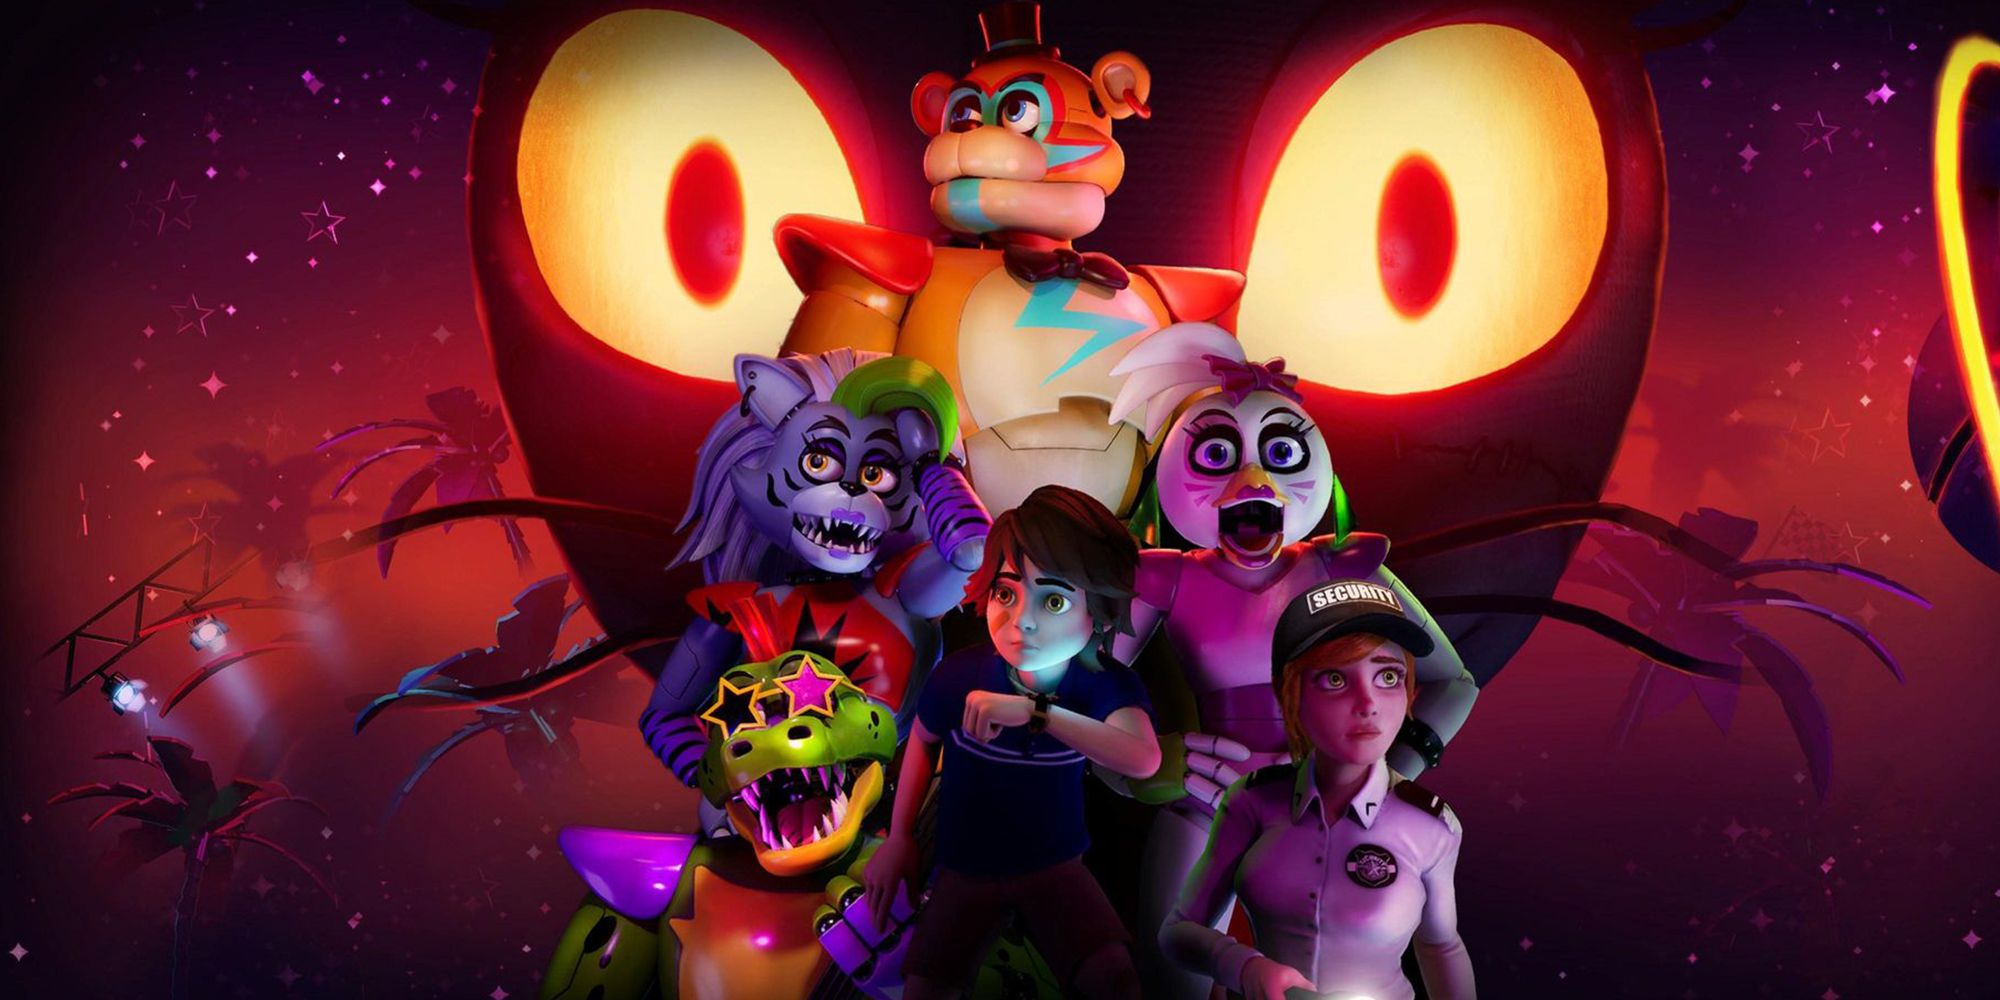 Five Nights at Freddy's: Security Breach now available for Switch